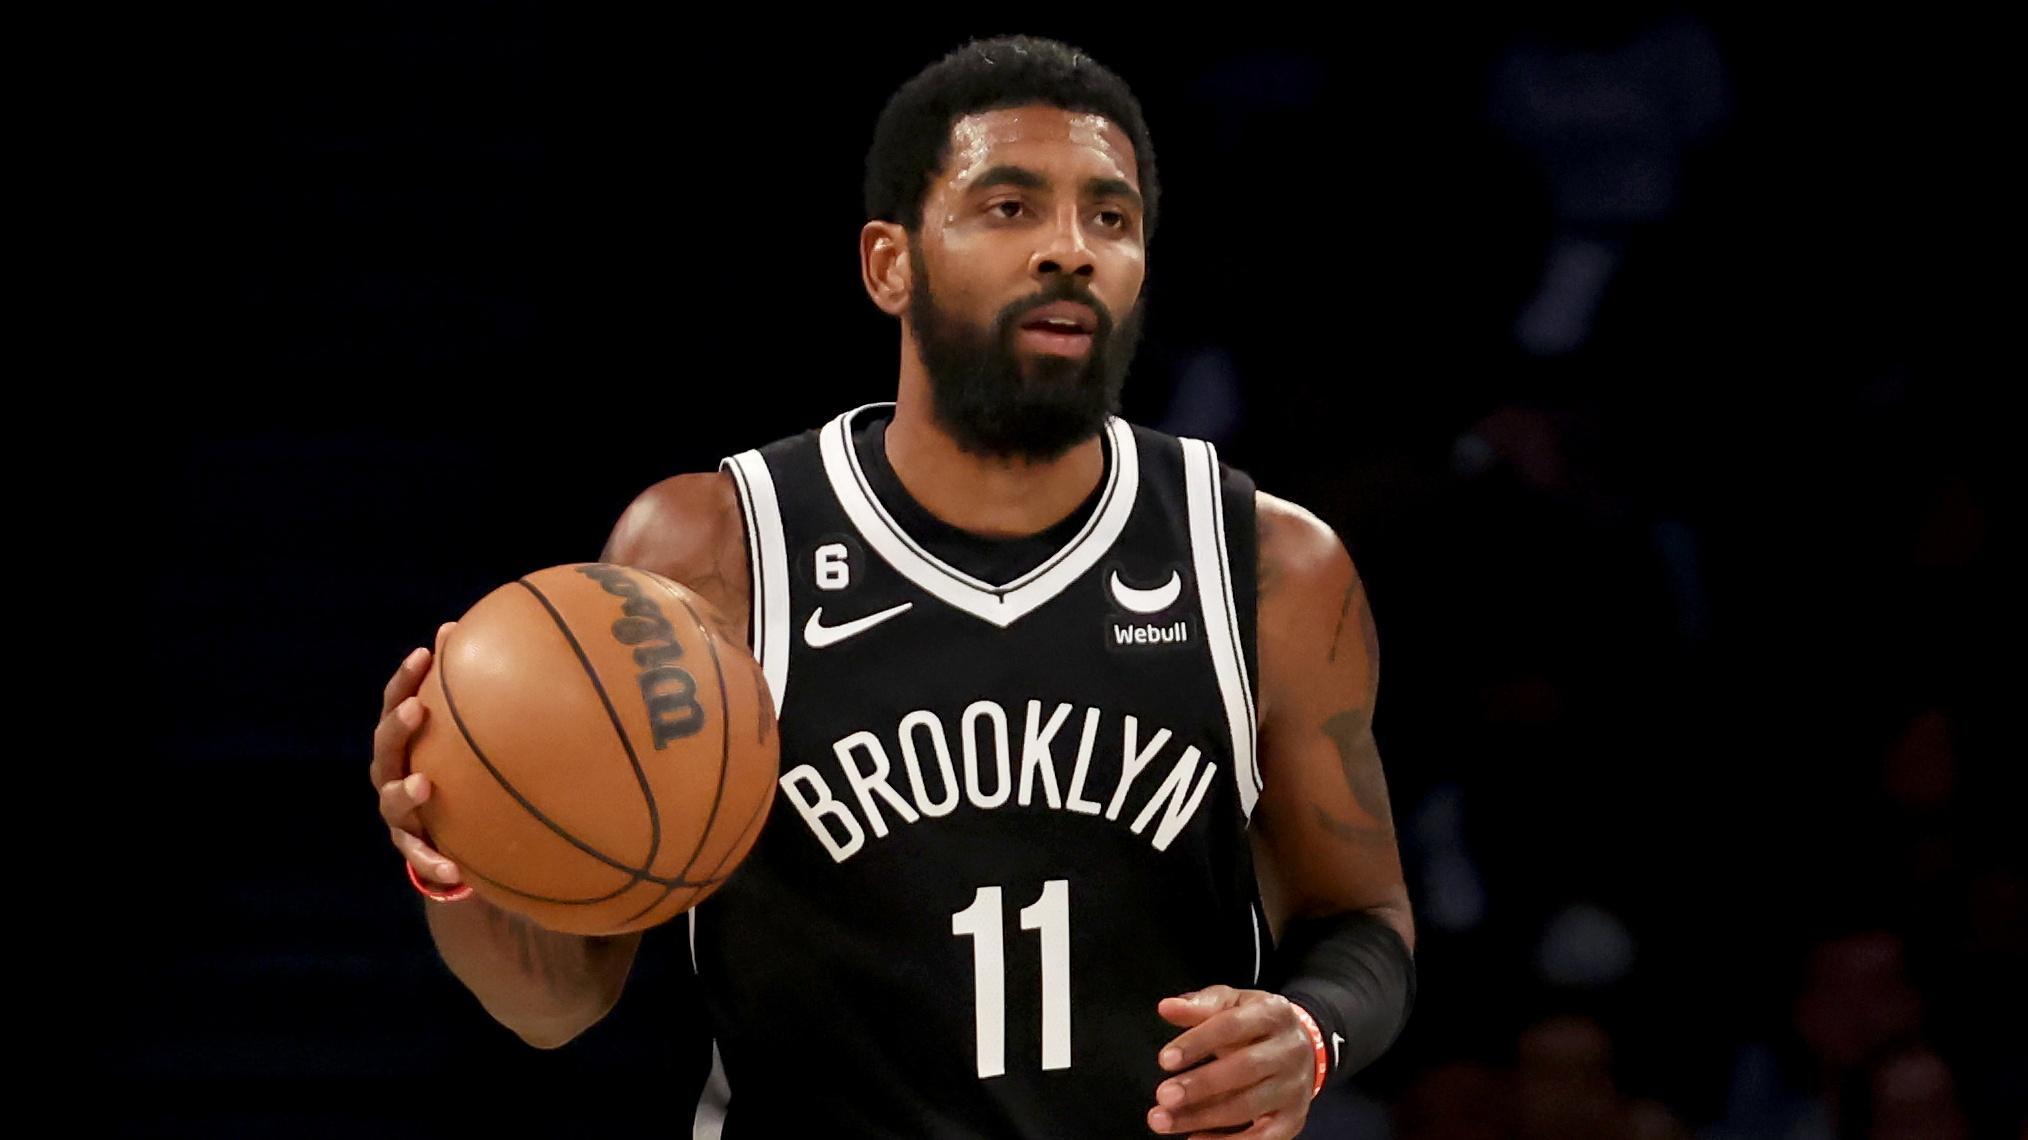 Oct 19, 2022; Brooklyn, New York, USA; Brooklyn Nets guard Kyrie Irving (11) brings the ball up court against the New Orleans Pelicans during the second quarter at Barclays Center. Mandatory Credit: Brad Penner-USA TODAY Sports / © Brad Penner-USA TODAY Sports